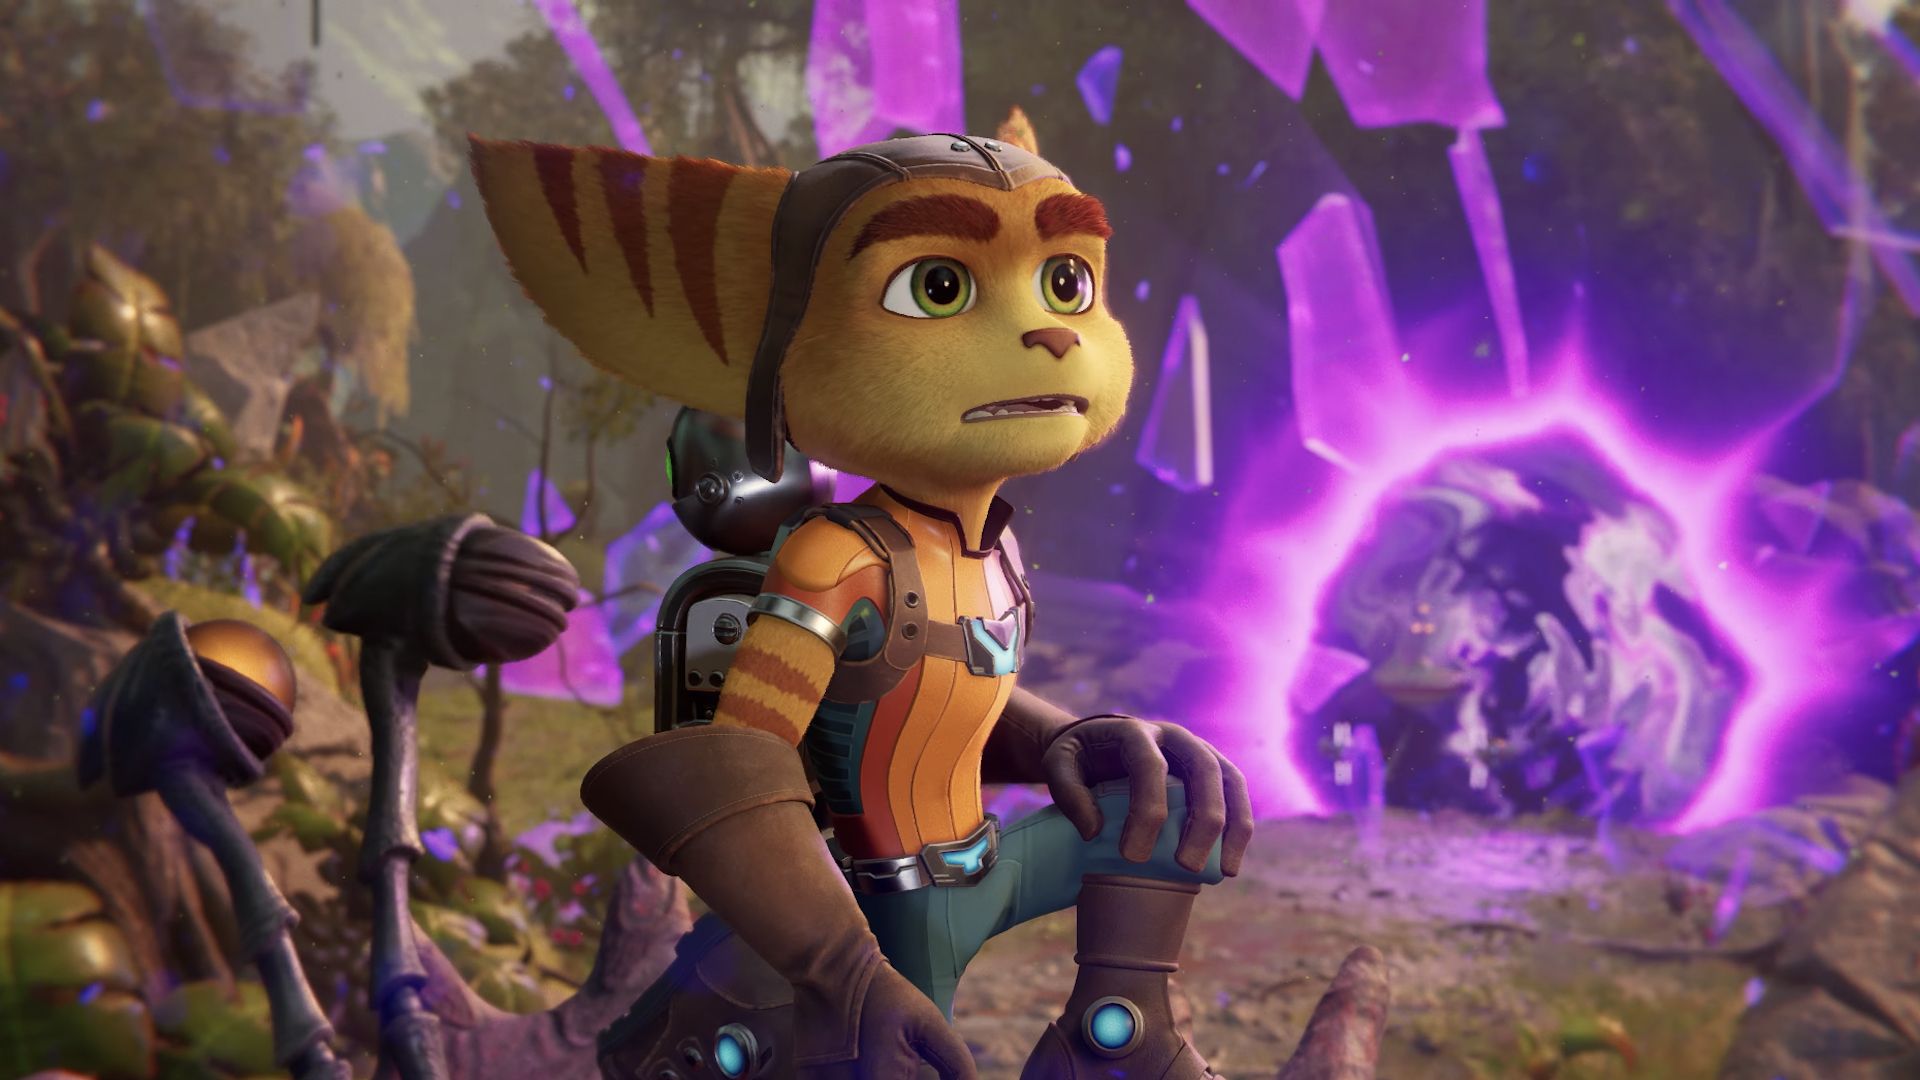 Ratchet And Clank: Rift Apart Includes Modes For 4K 30 FPS And 60 FPS At Lower Resolution